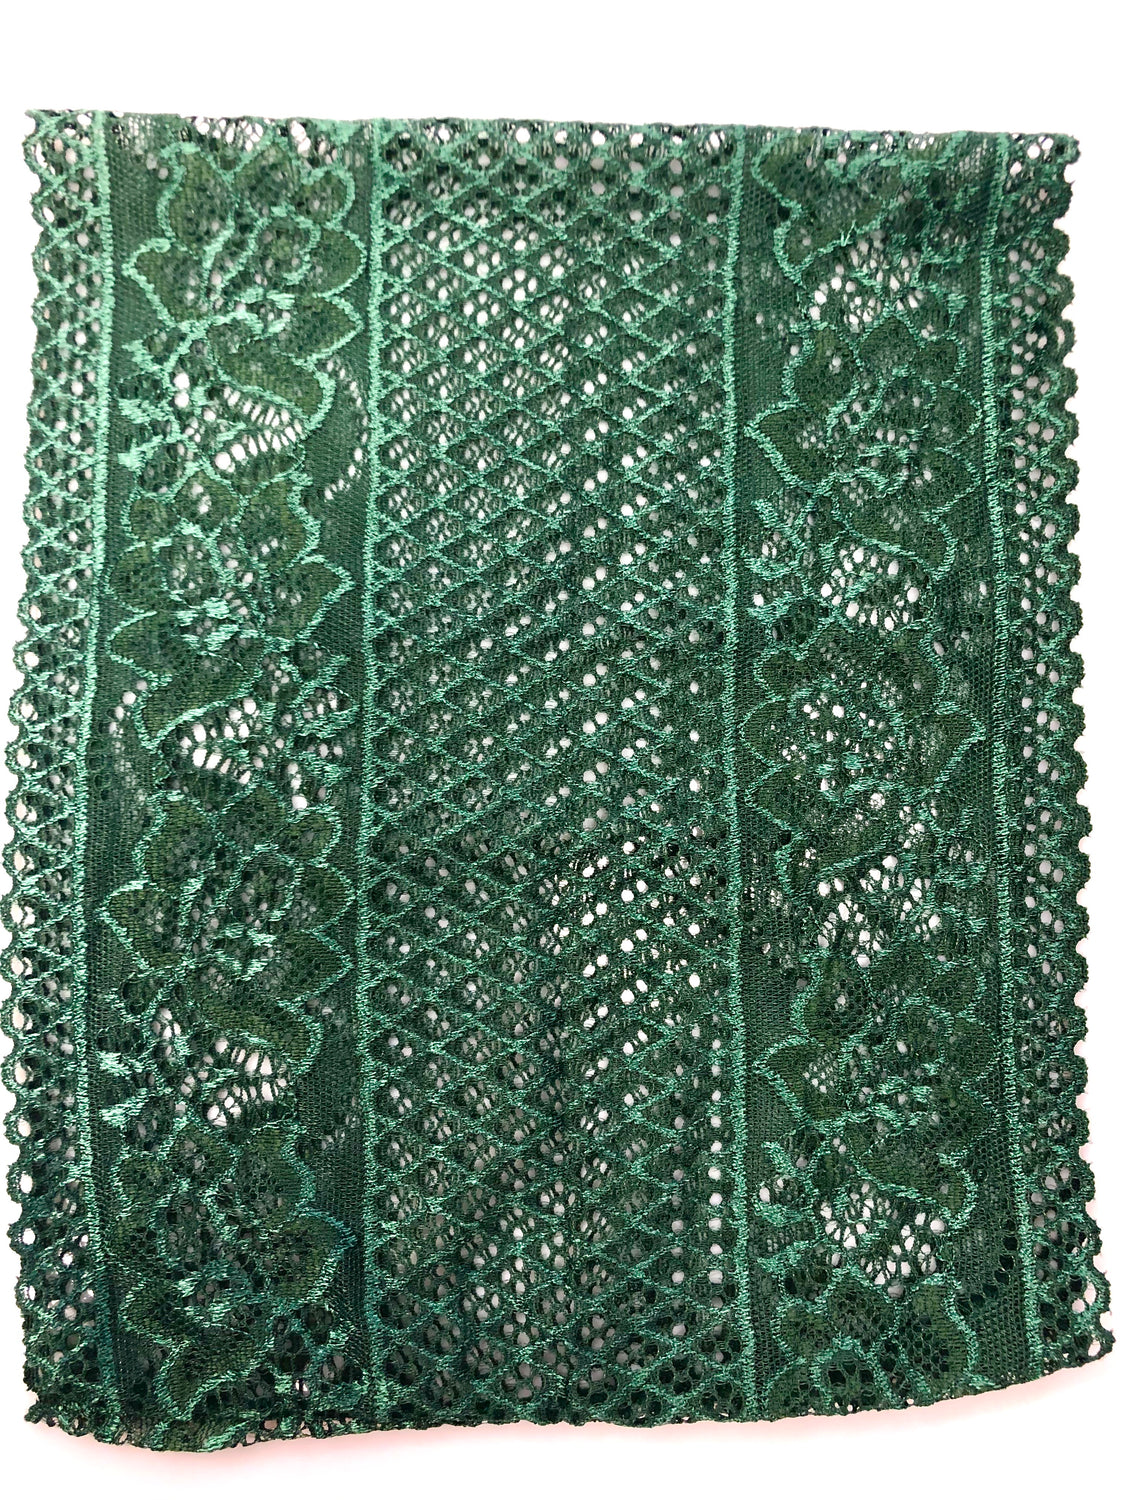 dark green forest green lace undercap scarf bonnet for hijab